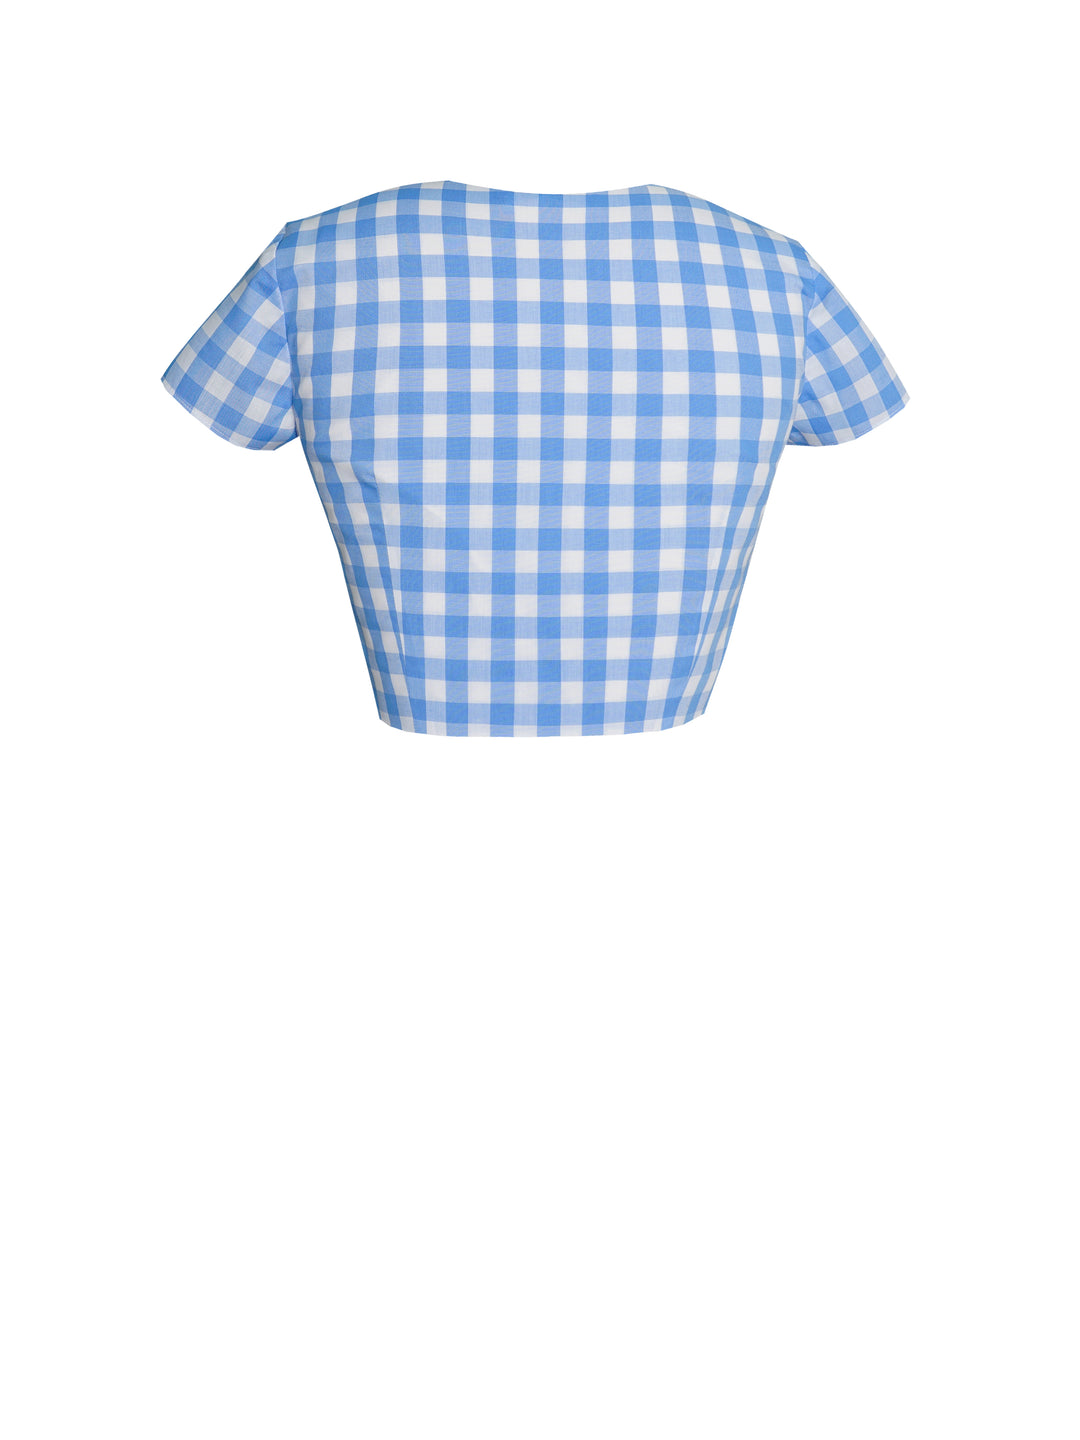 MTO - Joan Top Only Light Blue Gingham - Large Checks